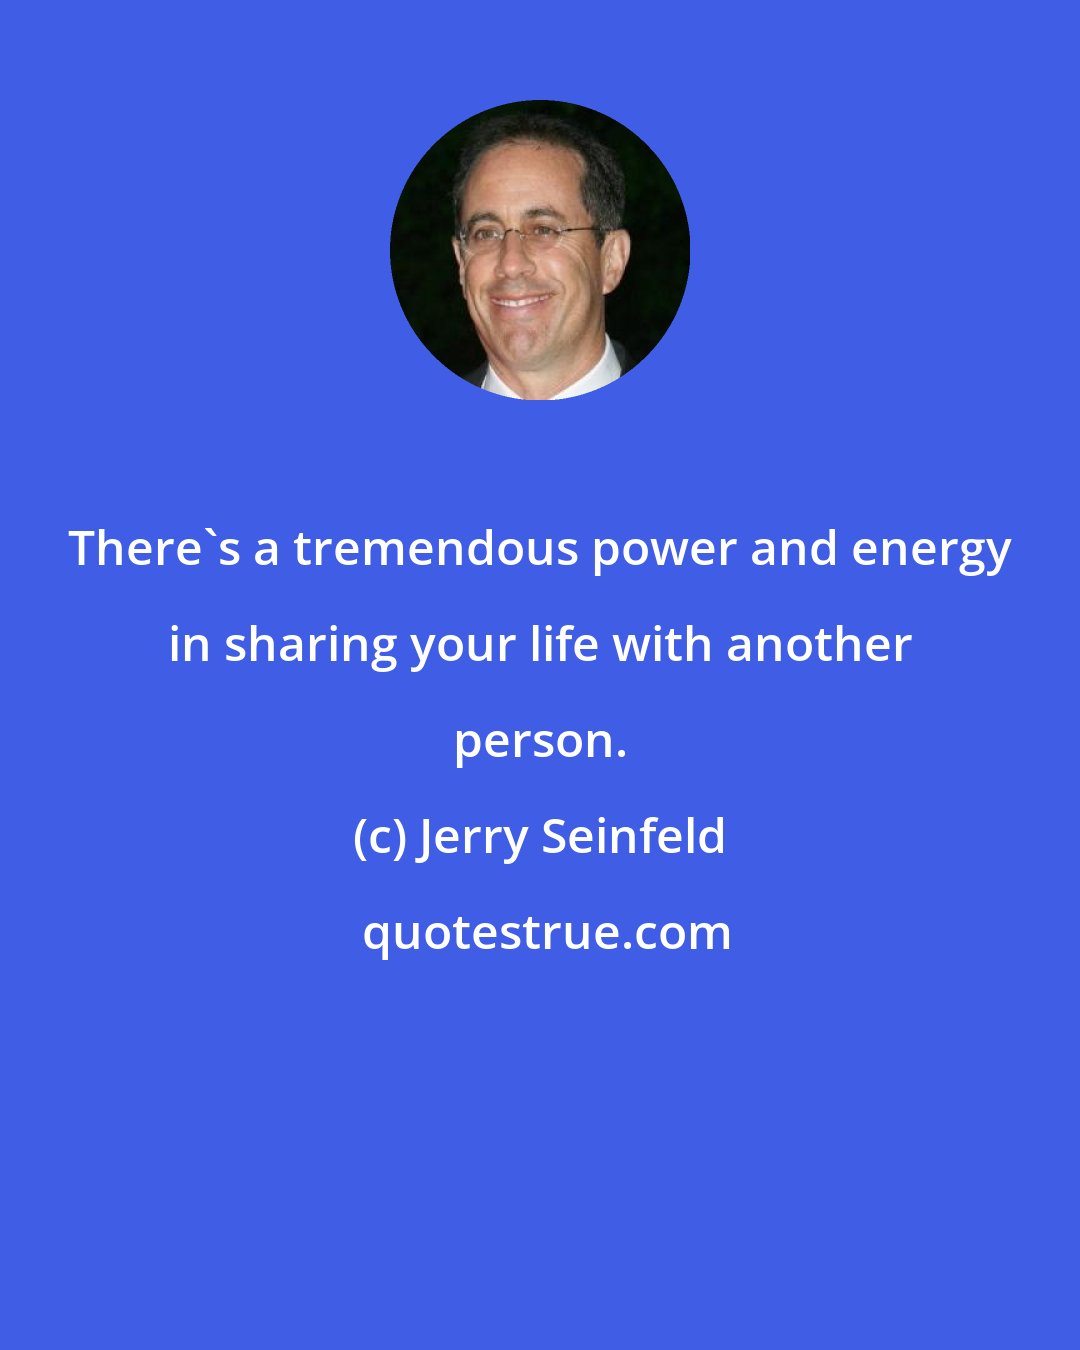 Jerry Seinfeld: There's a tremendous power and energy in sharing your life with another person.